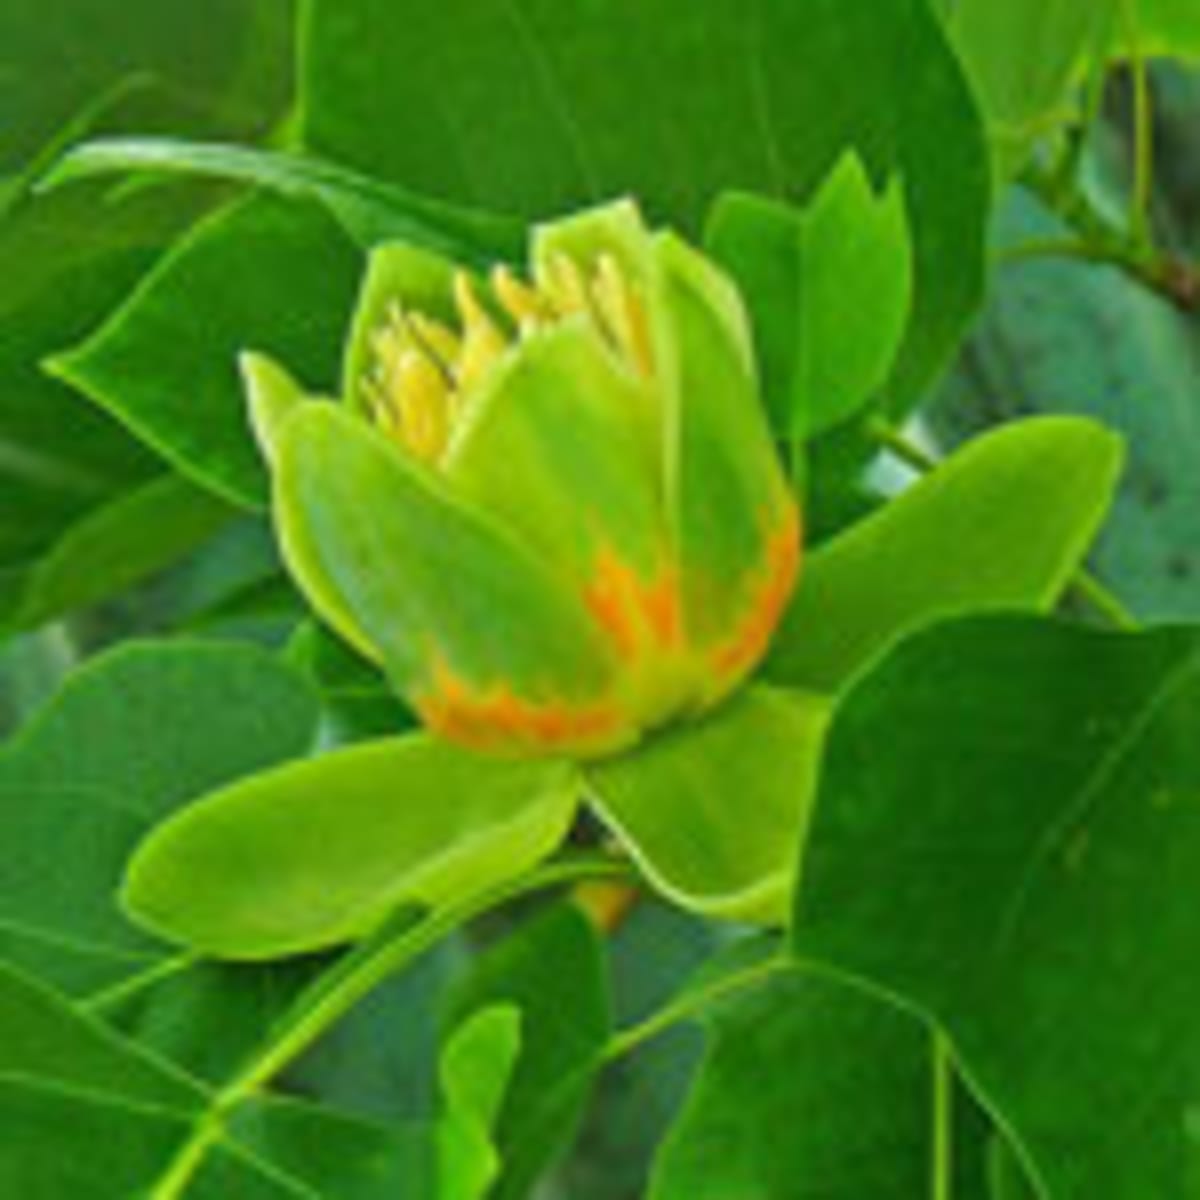 Tulip Tree Has Unique Spring Flowers and Golden Fall Foliage - Horticulture